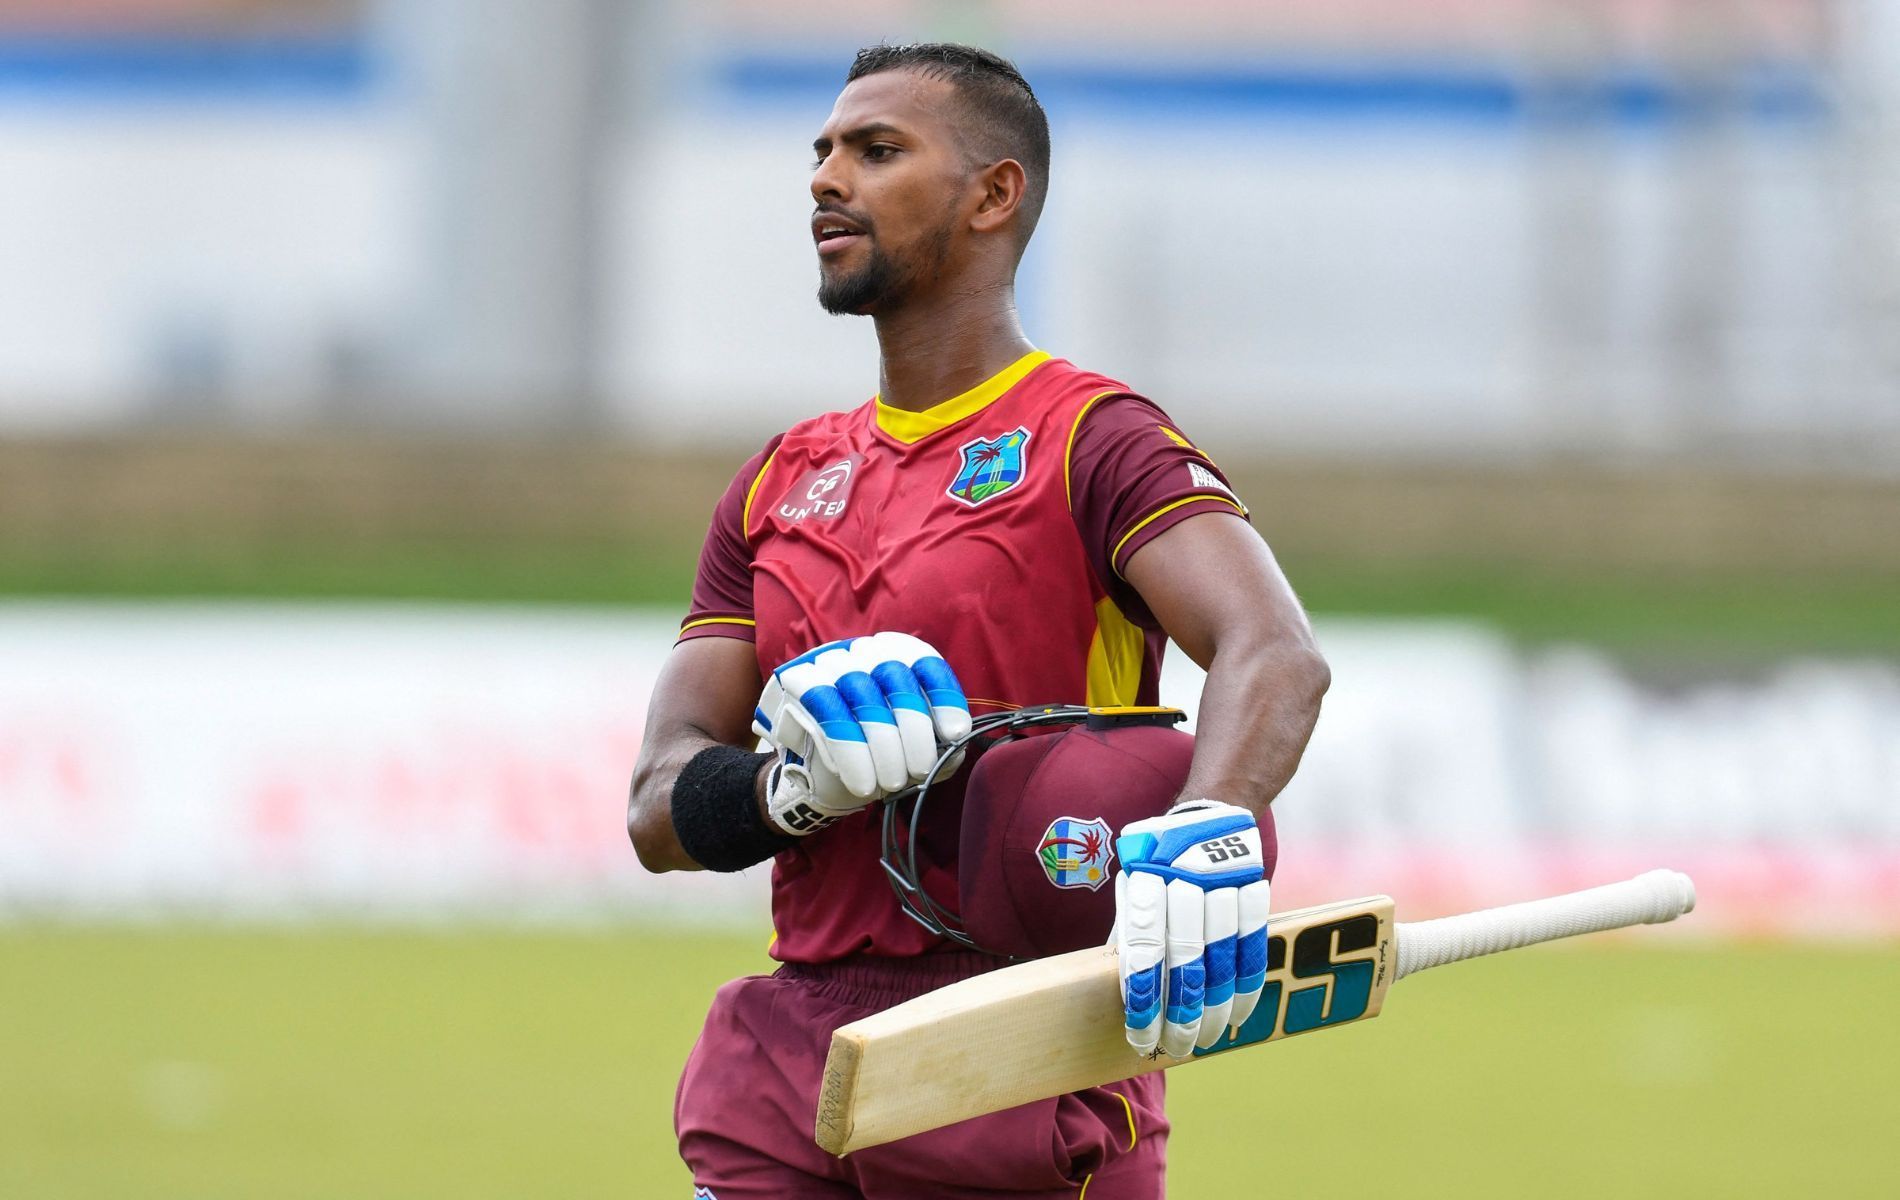 West Indies lost the five-match T20I series against India by 4-1.